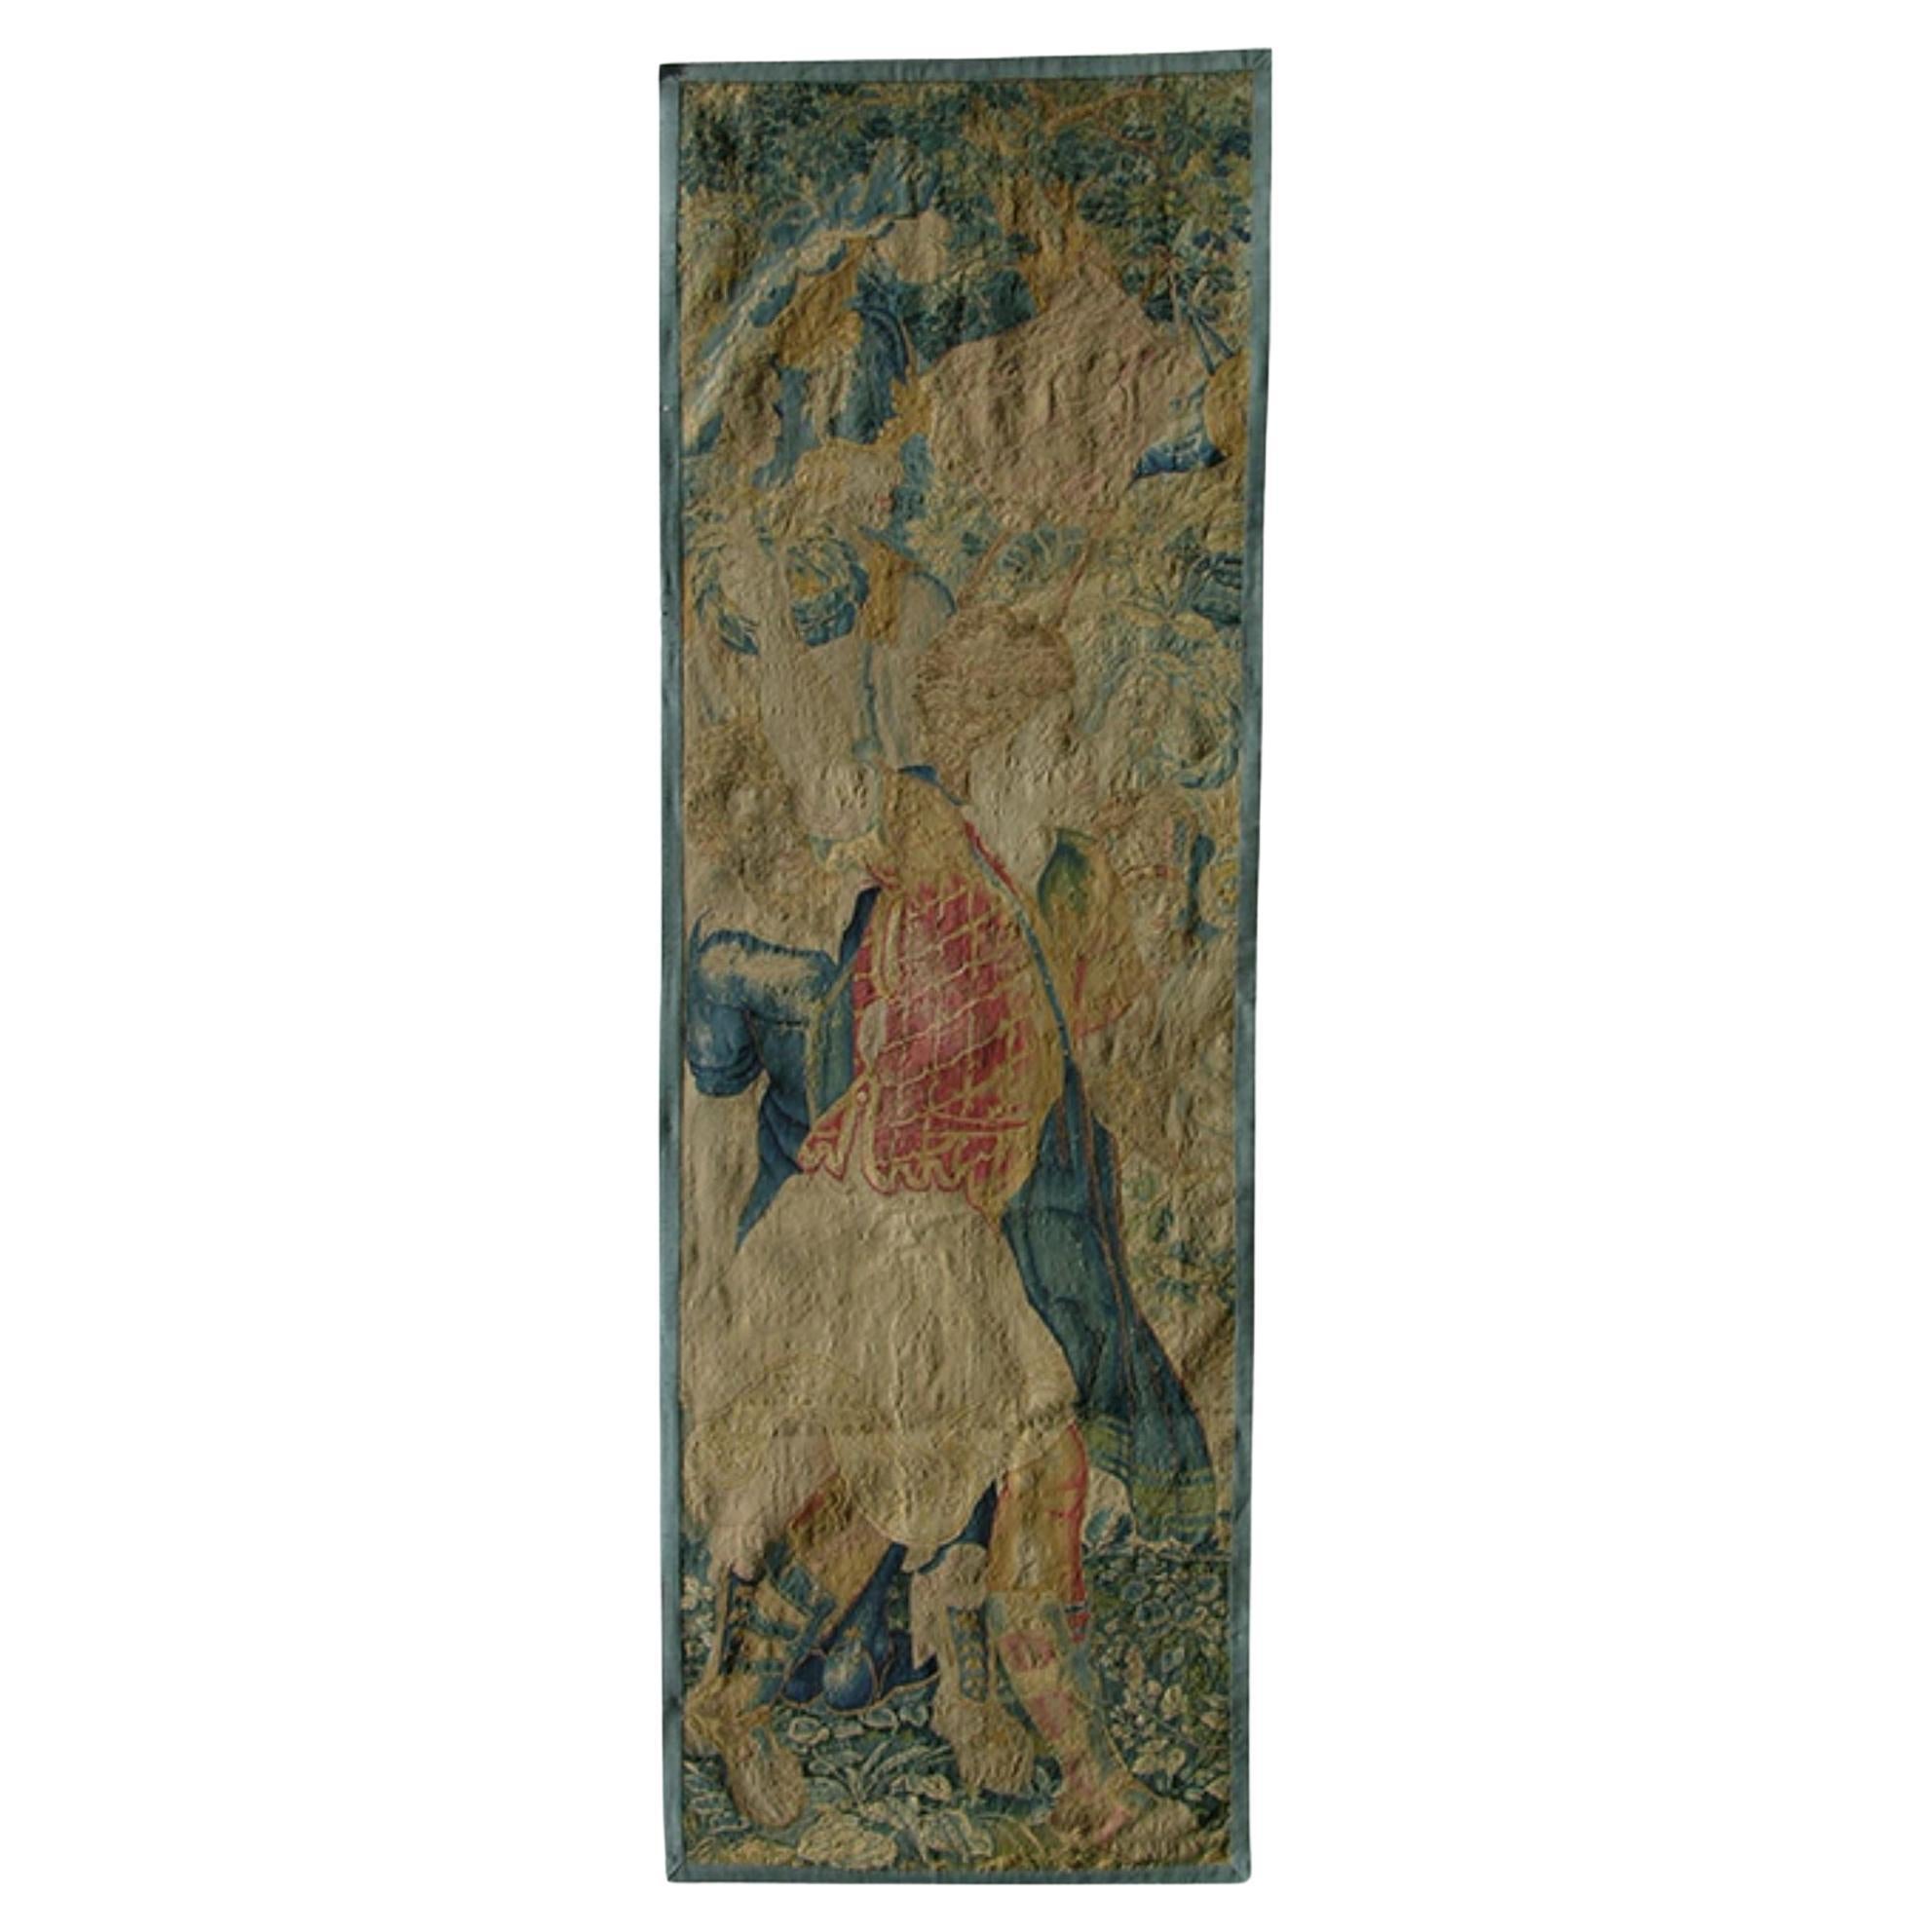 16th Century Antique Brussels Tapestry 10'2" X 3'3"